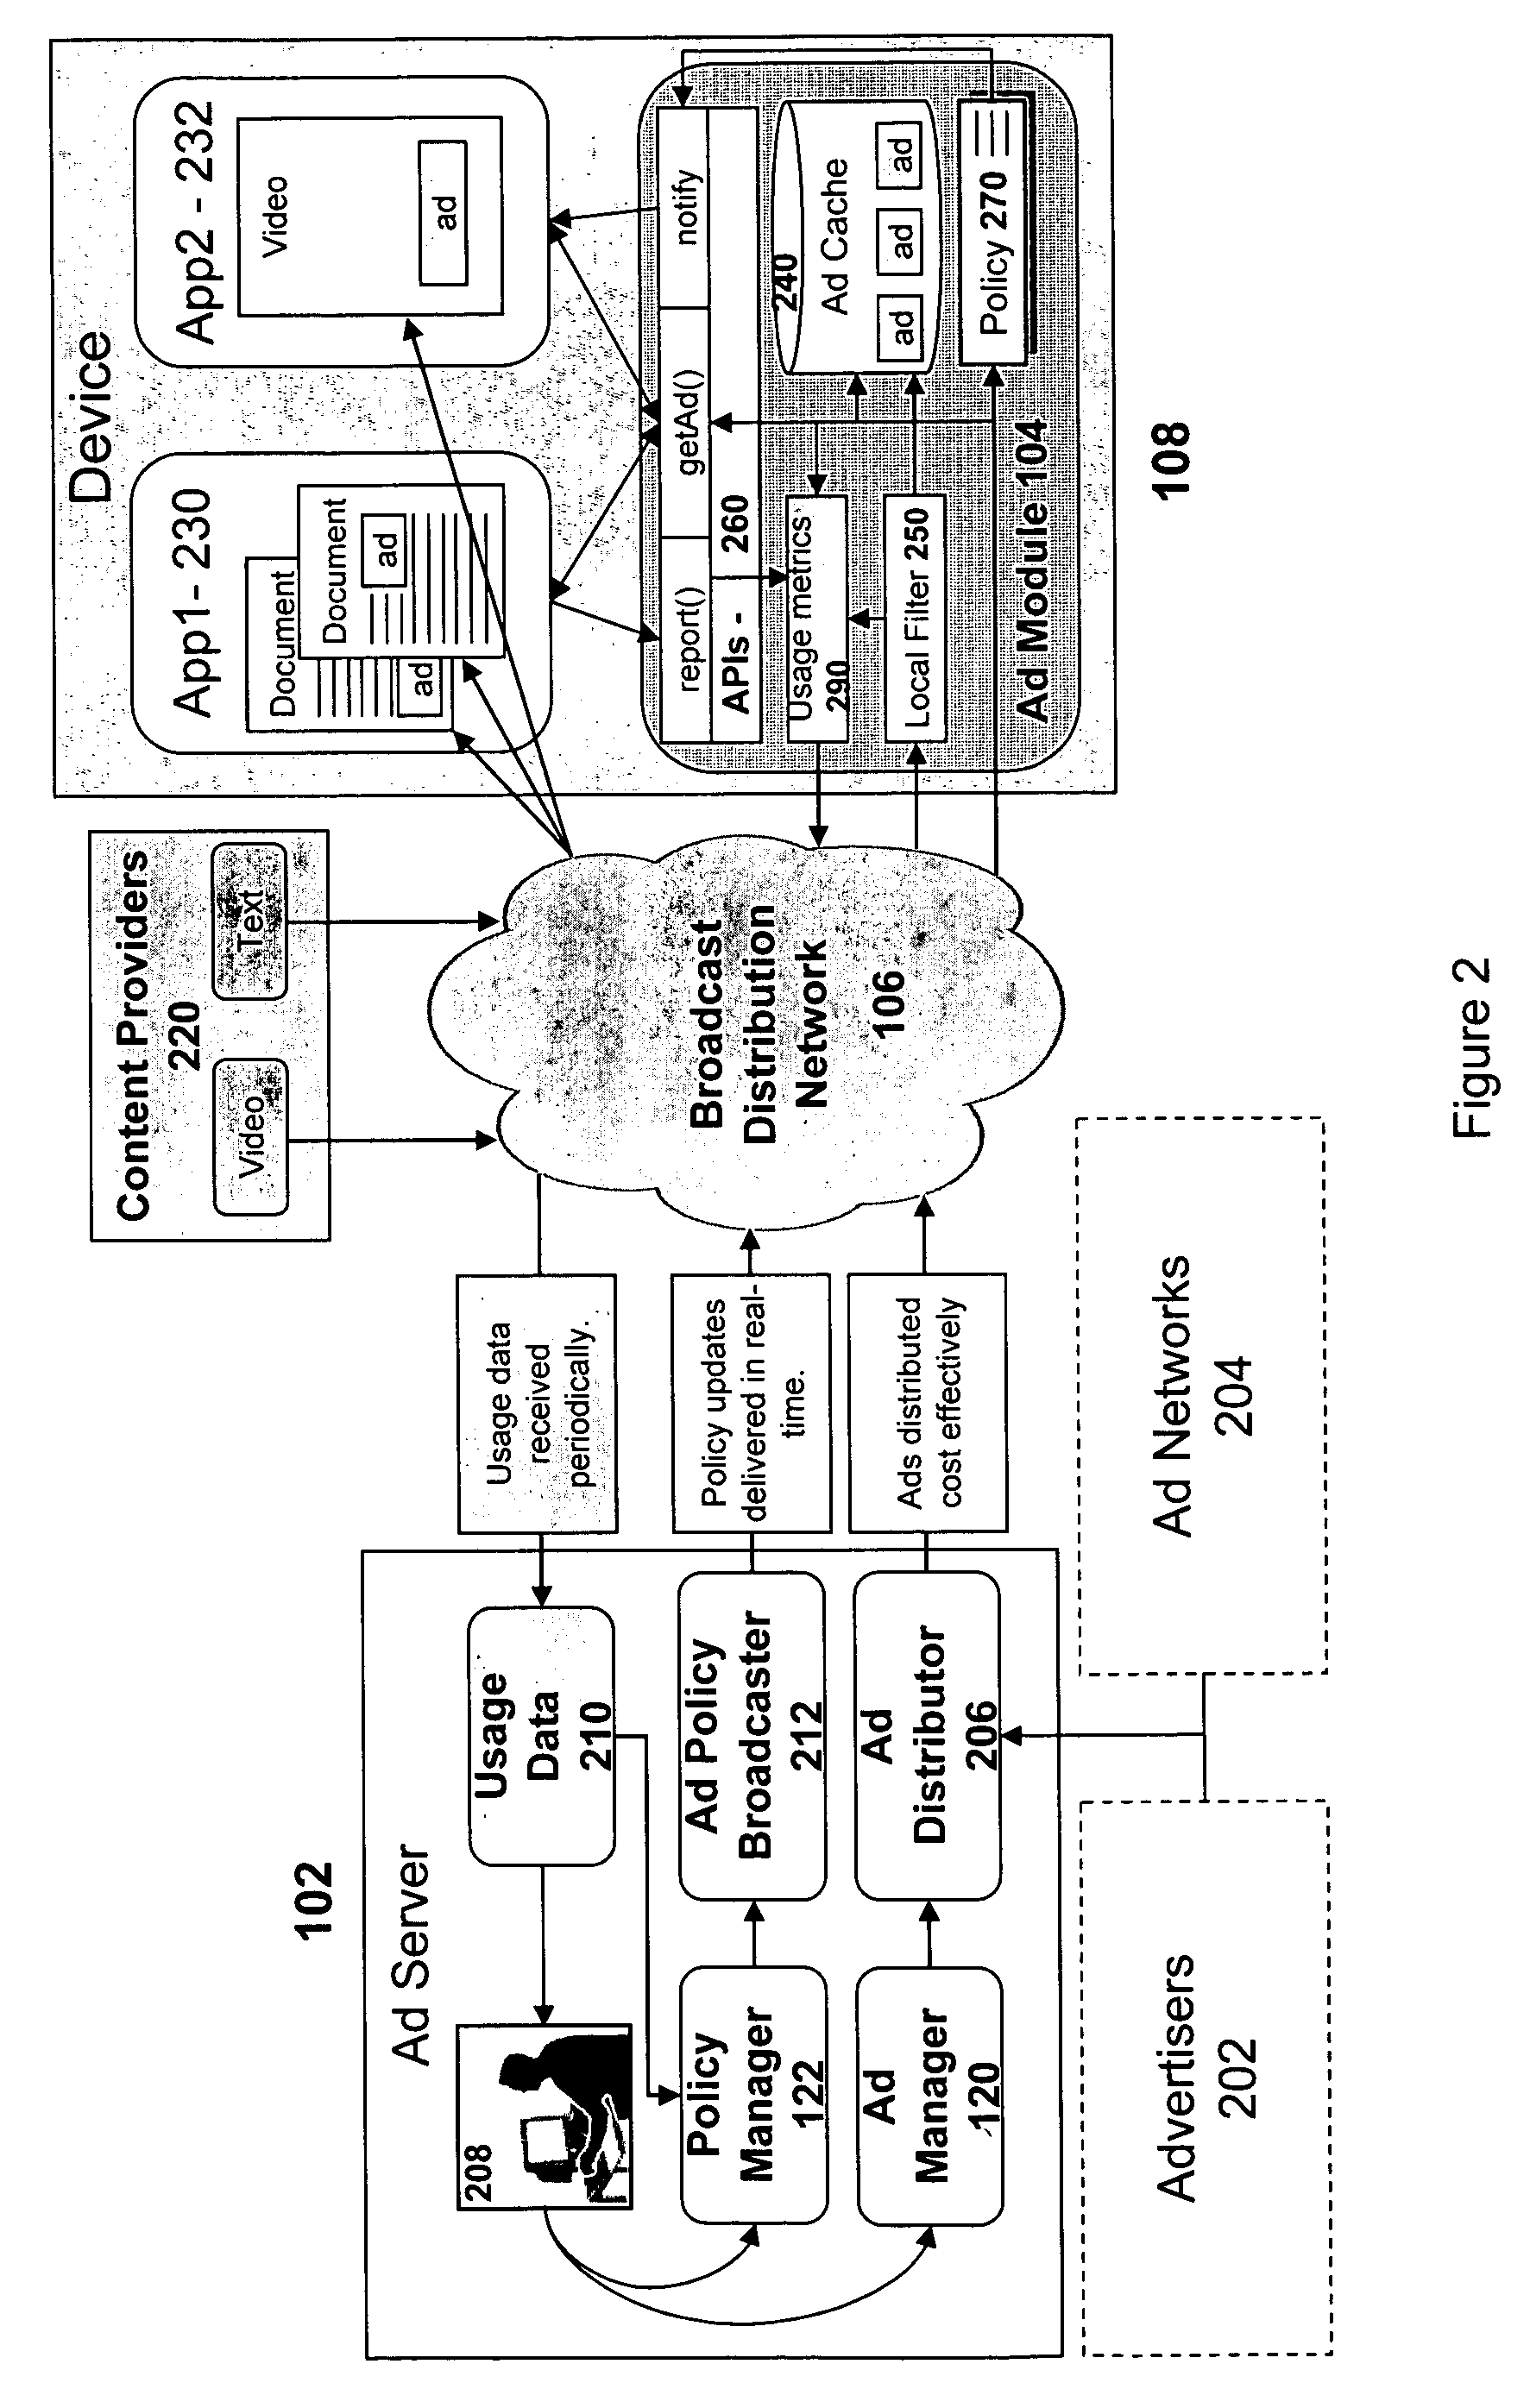 Distribution and display of advertising for devices in a network